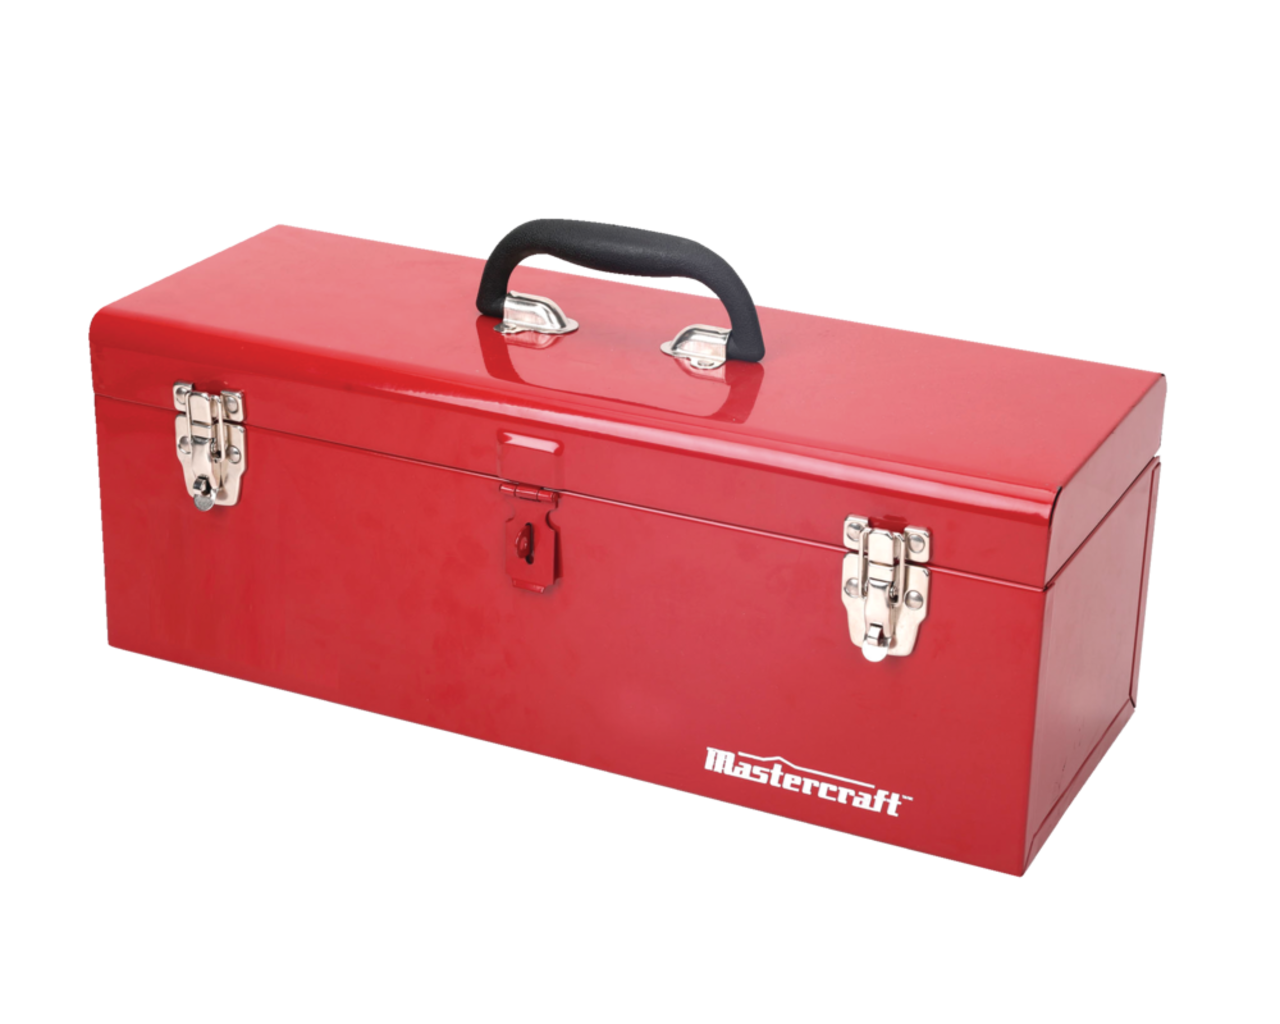 Mastercraft Portable Metal Hip Roof Tool Box w/ Removable Tray